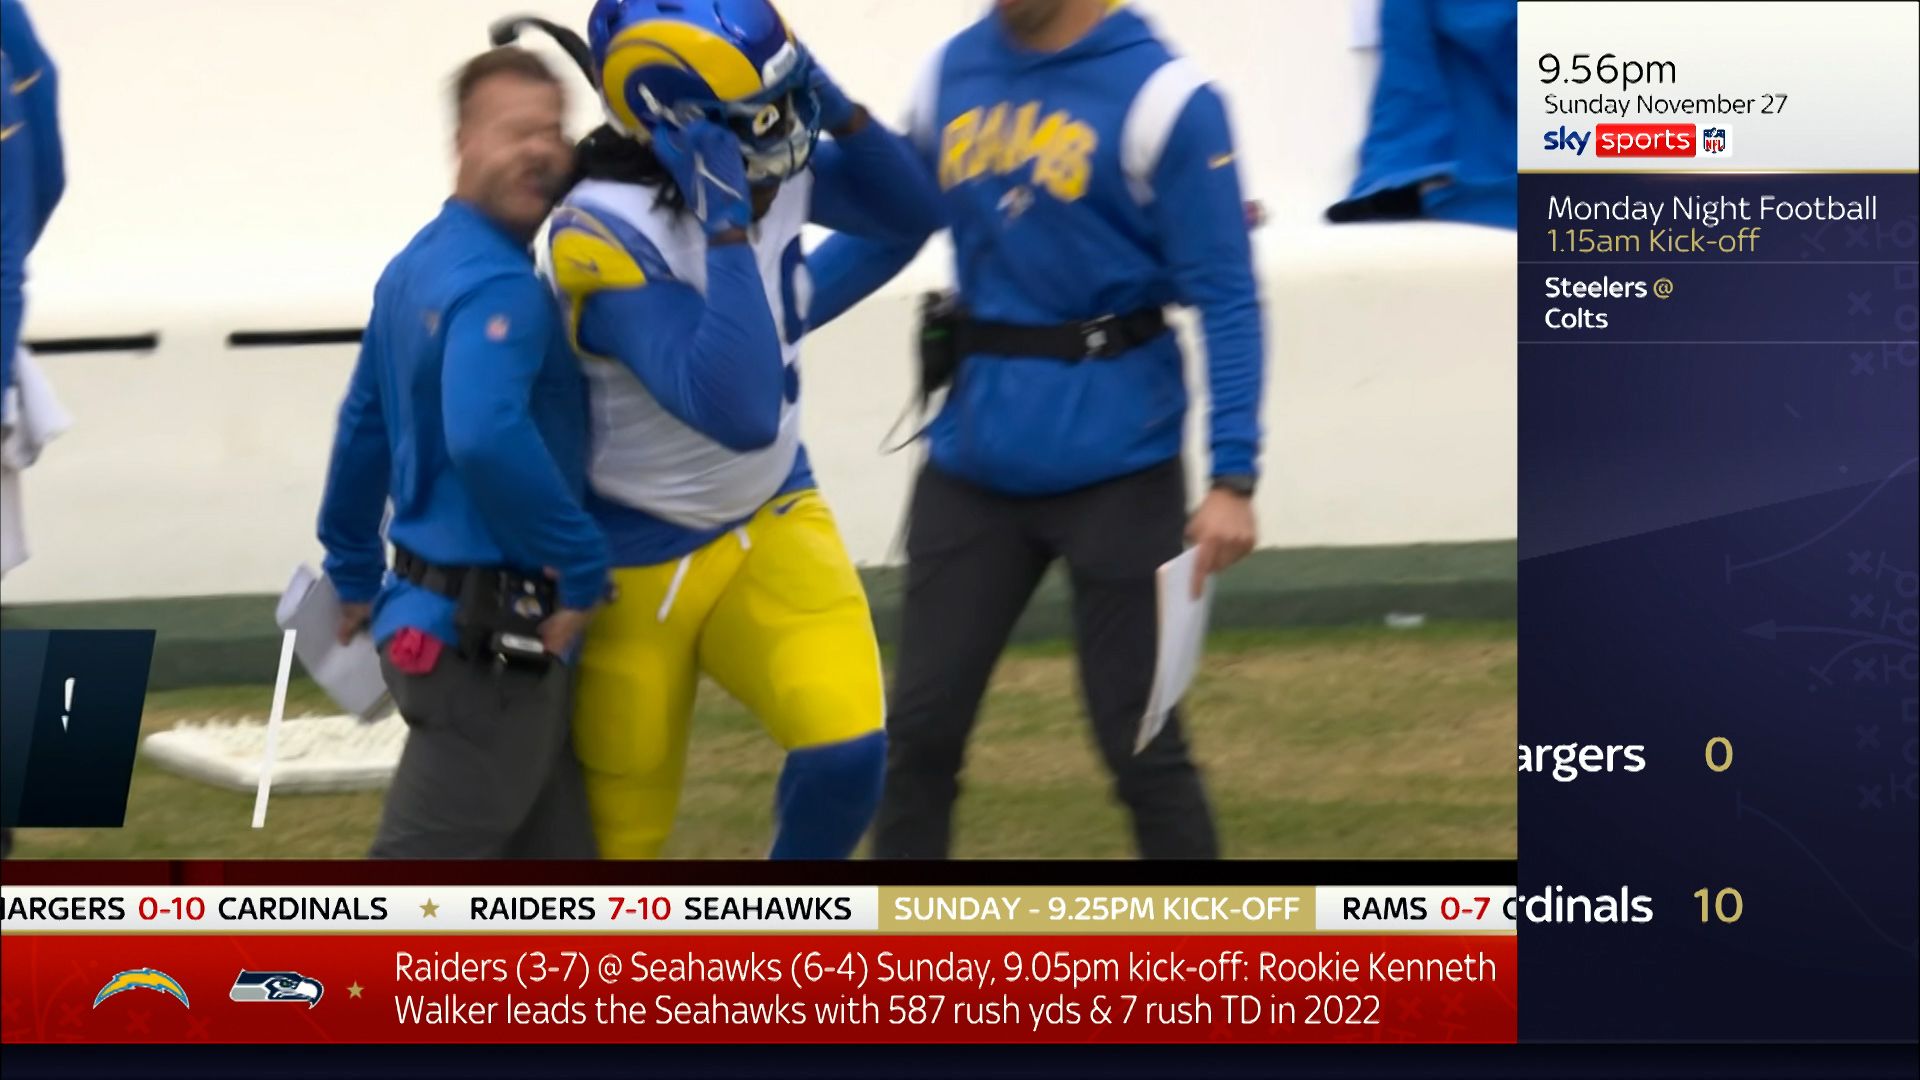 OUCH! Rams coach run into by own player!